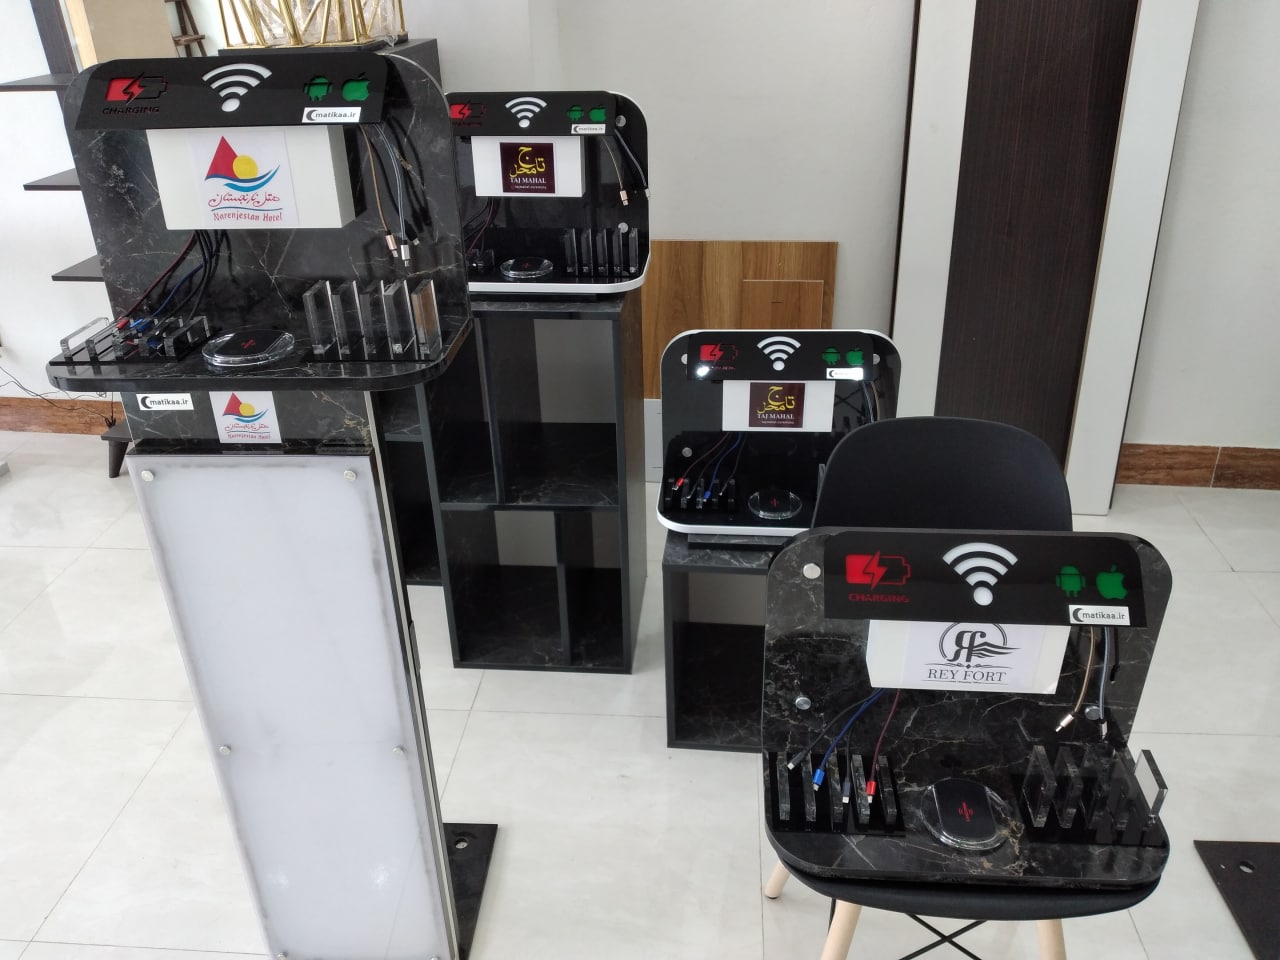 Charger - Mobile Charging - Mobile Charger Stand - Public Storage Charger - Mobile Charging Stand - Charging Stand - Mobile Charging Station - Mobile Charger - Public Places Charger - General Chargers - Mobile Charger Mobile 